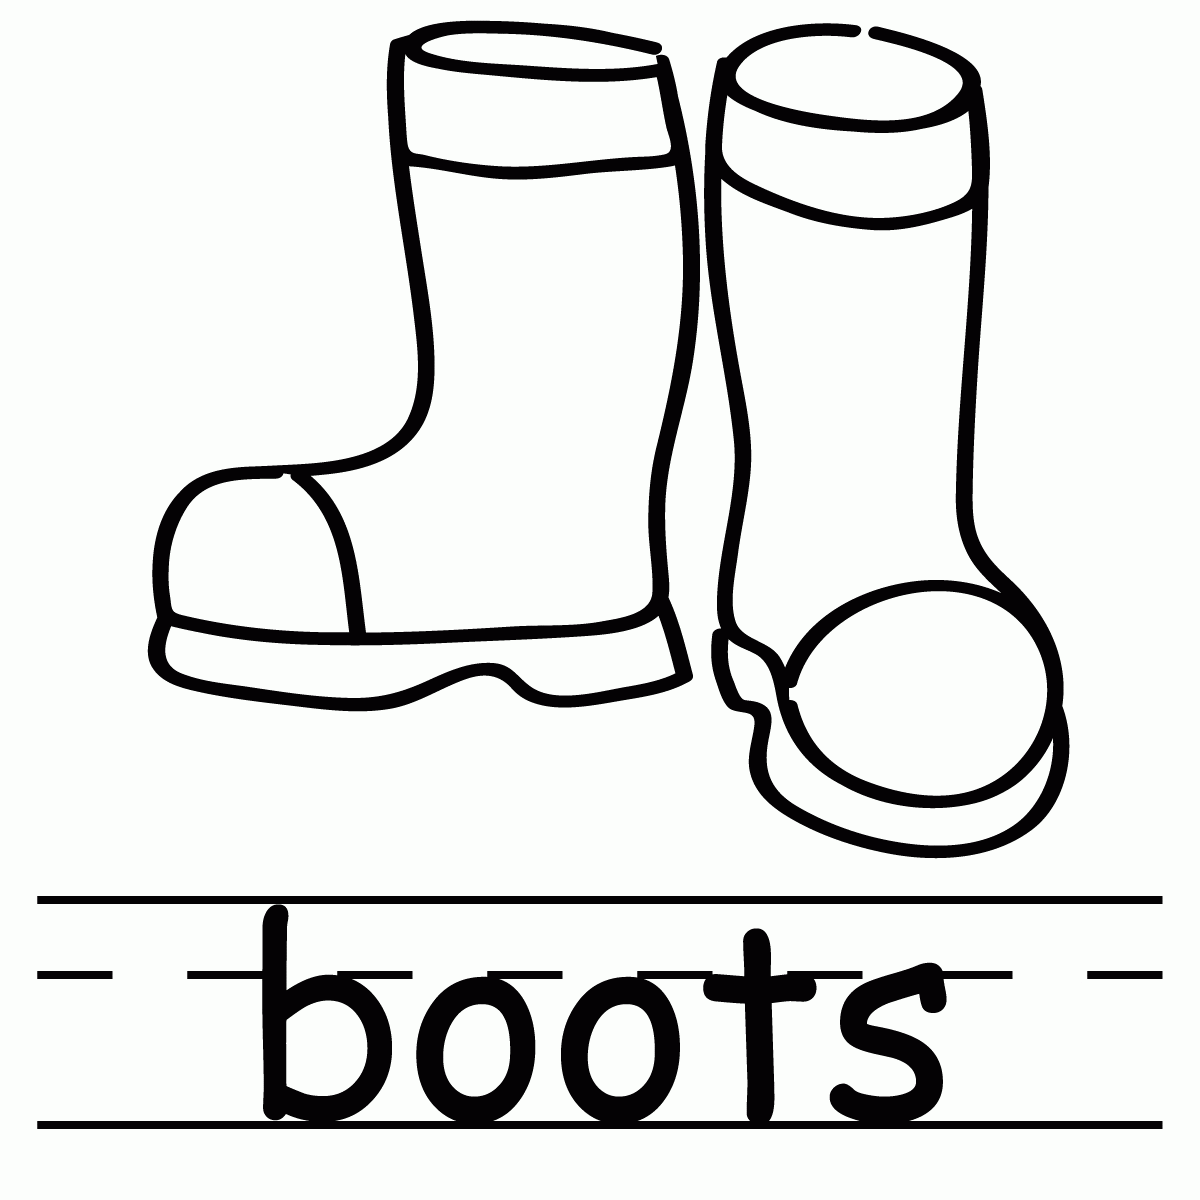 Free Rain Boots Coloring Page Download Free Rain Boots Coloring Page